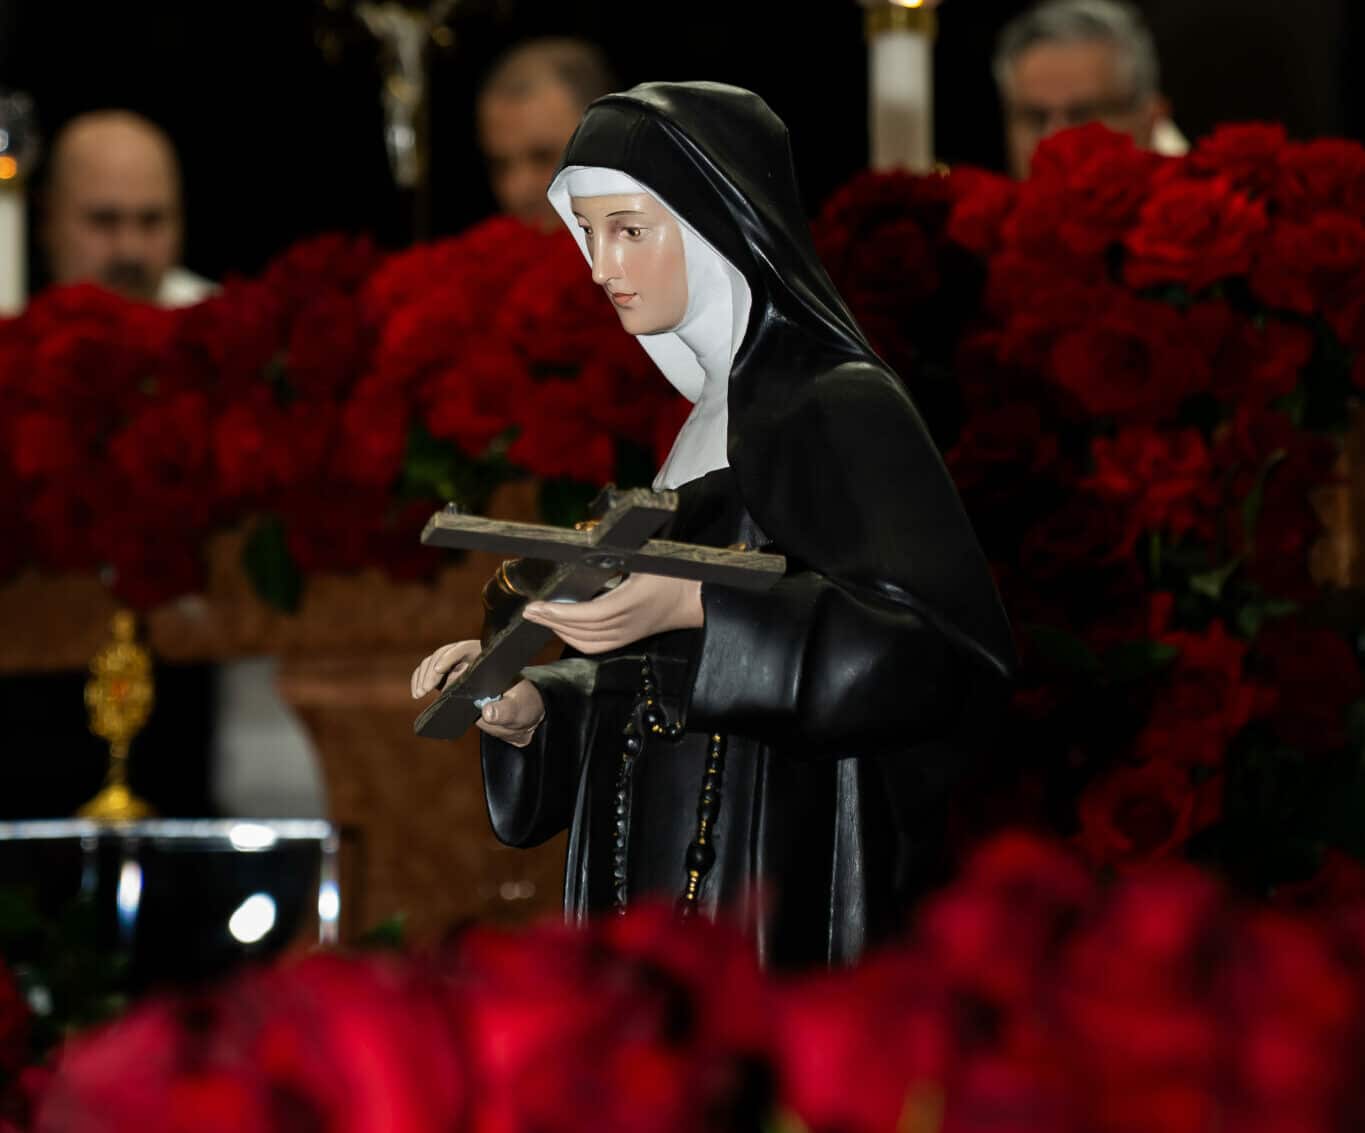 St Rita acquisition - The Catholic weekly